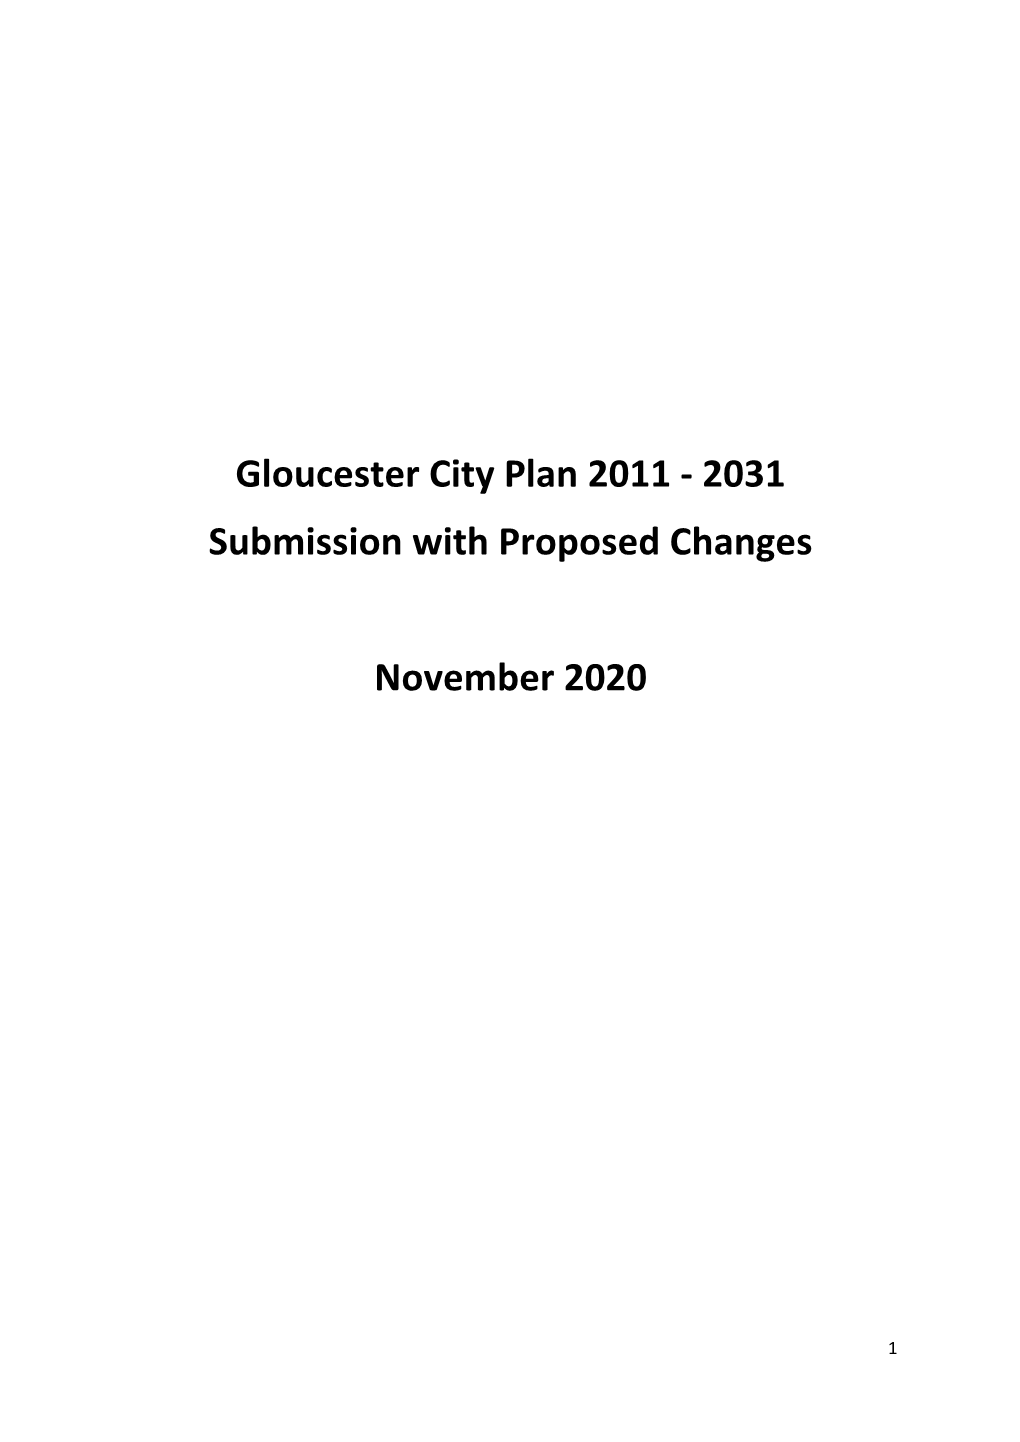 Gloucester City Plan 2011 - 2031 Submission with Proposed Changes